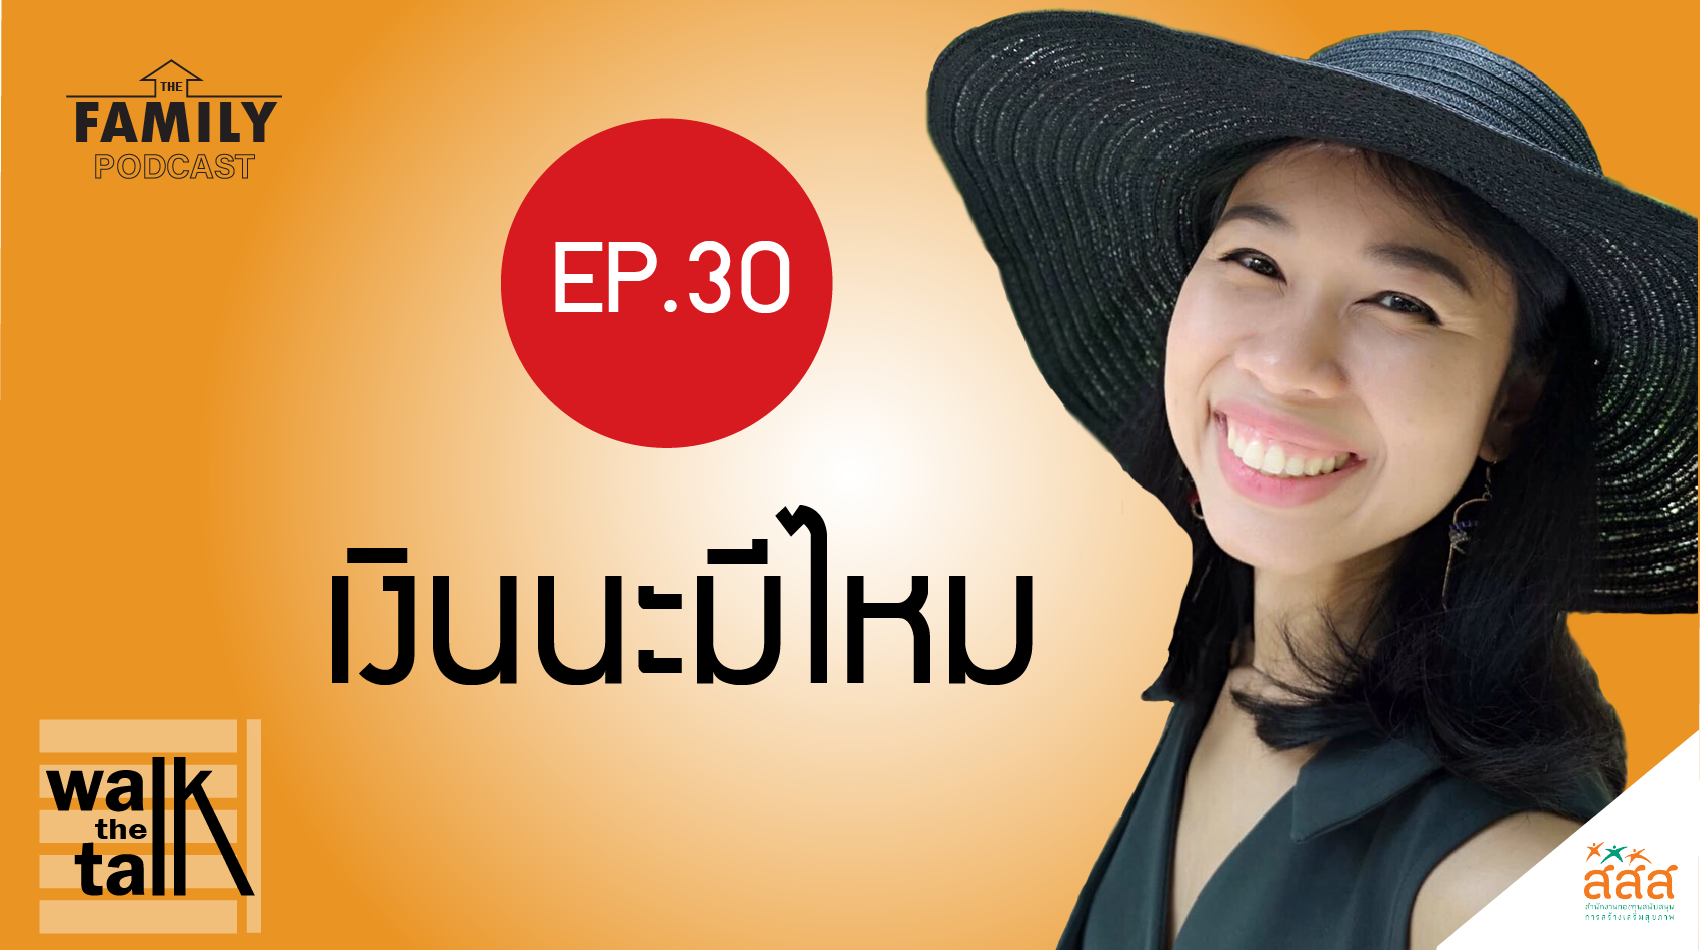 The Family Podcast Walk the Talk EP.30 เงินนะมีไหม